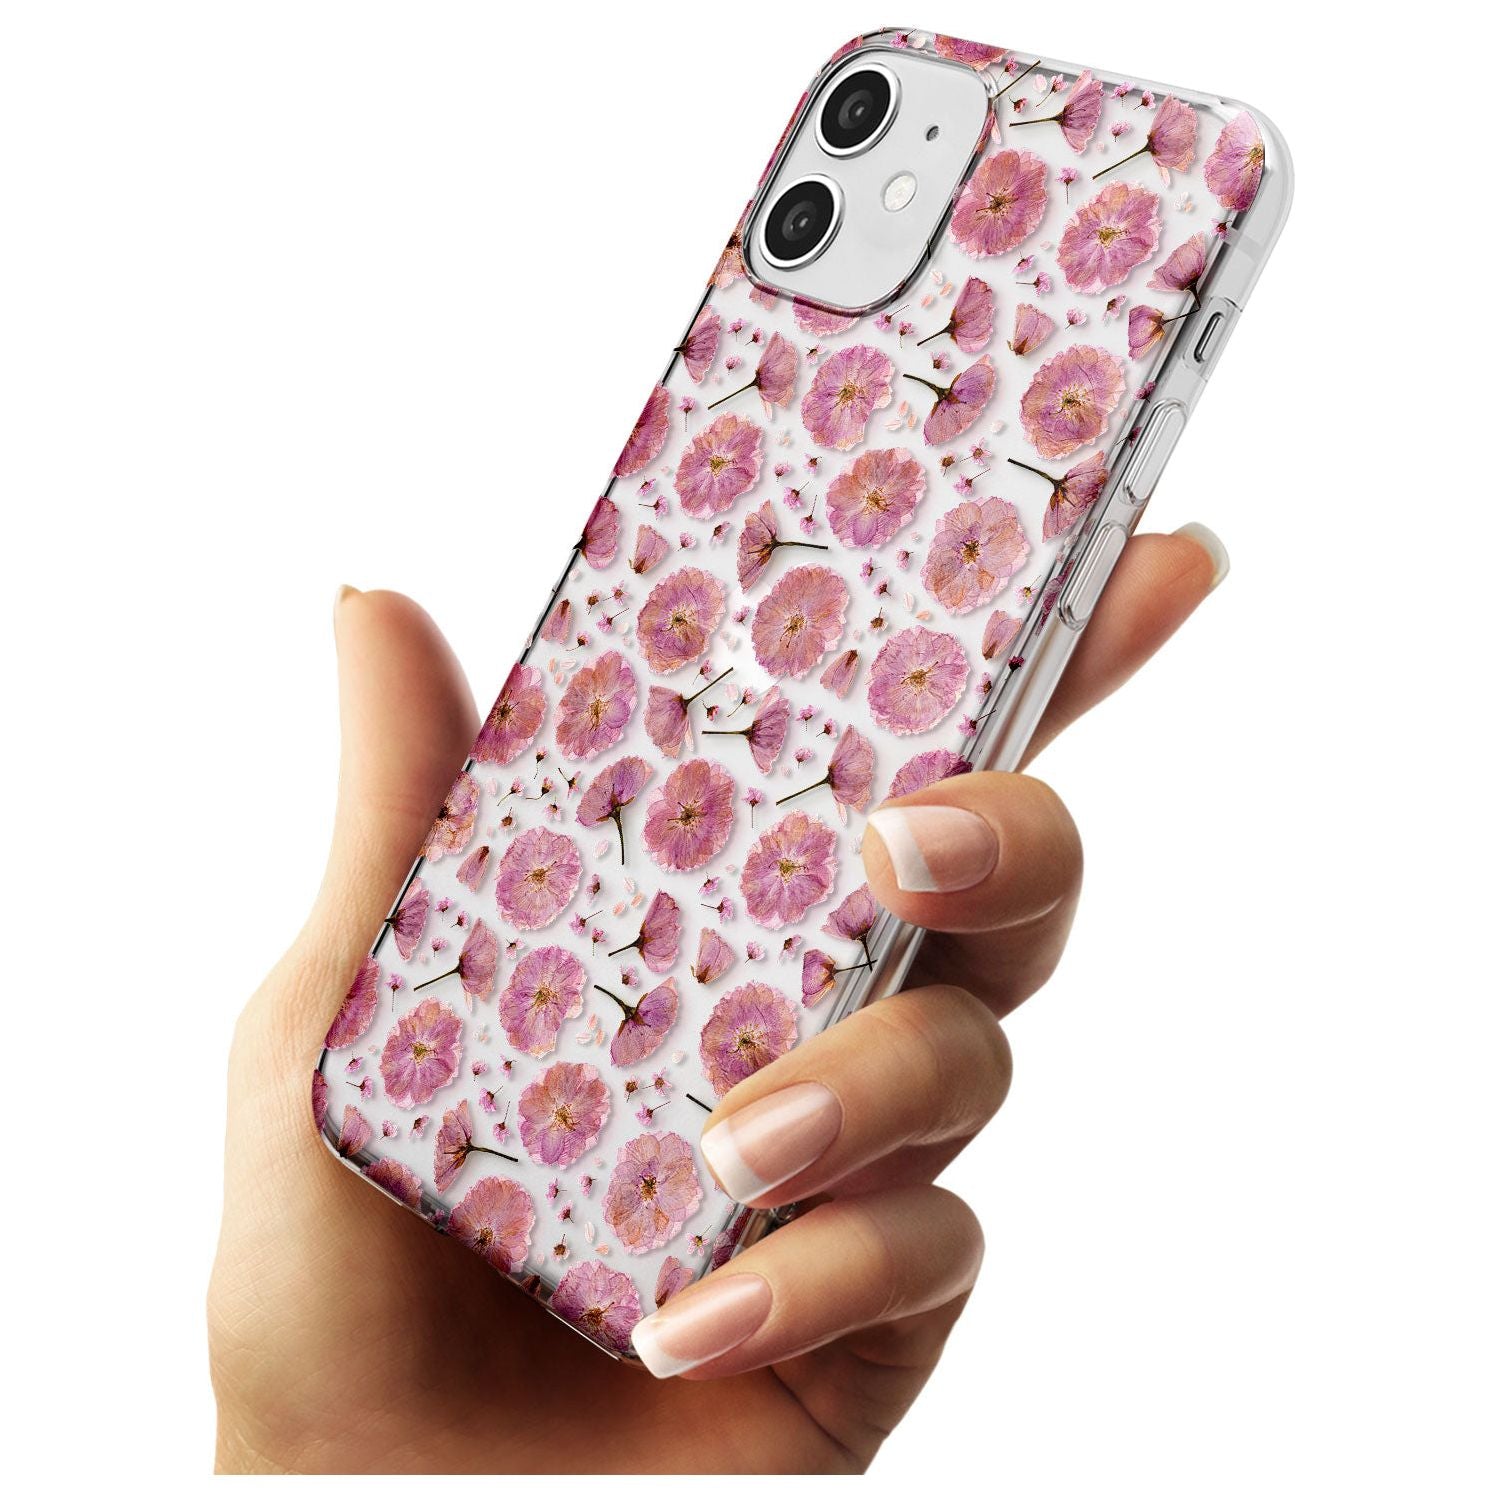 Pink Flowers & Blossoms Transparent Design Slim TPU Phone Case for iPhone 11